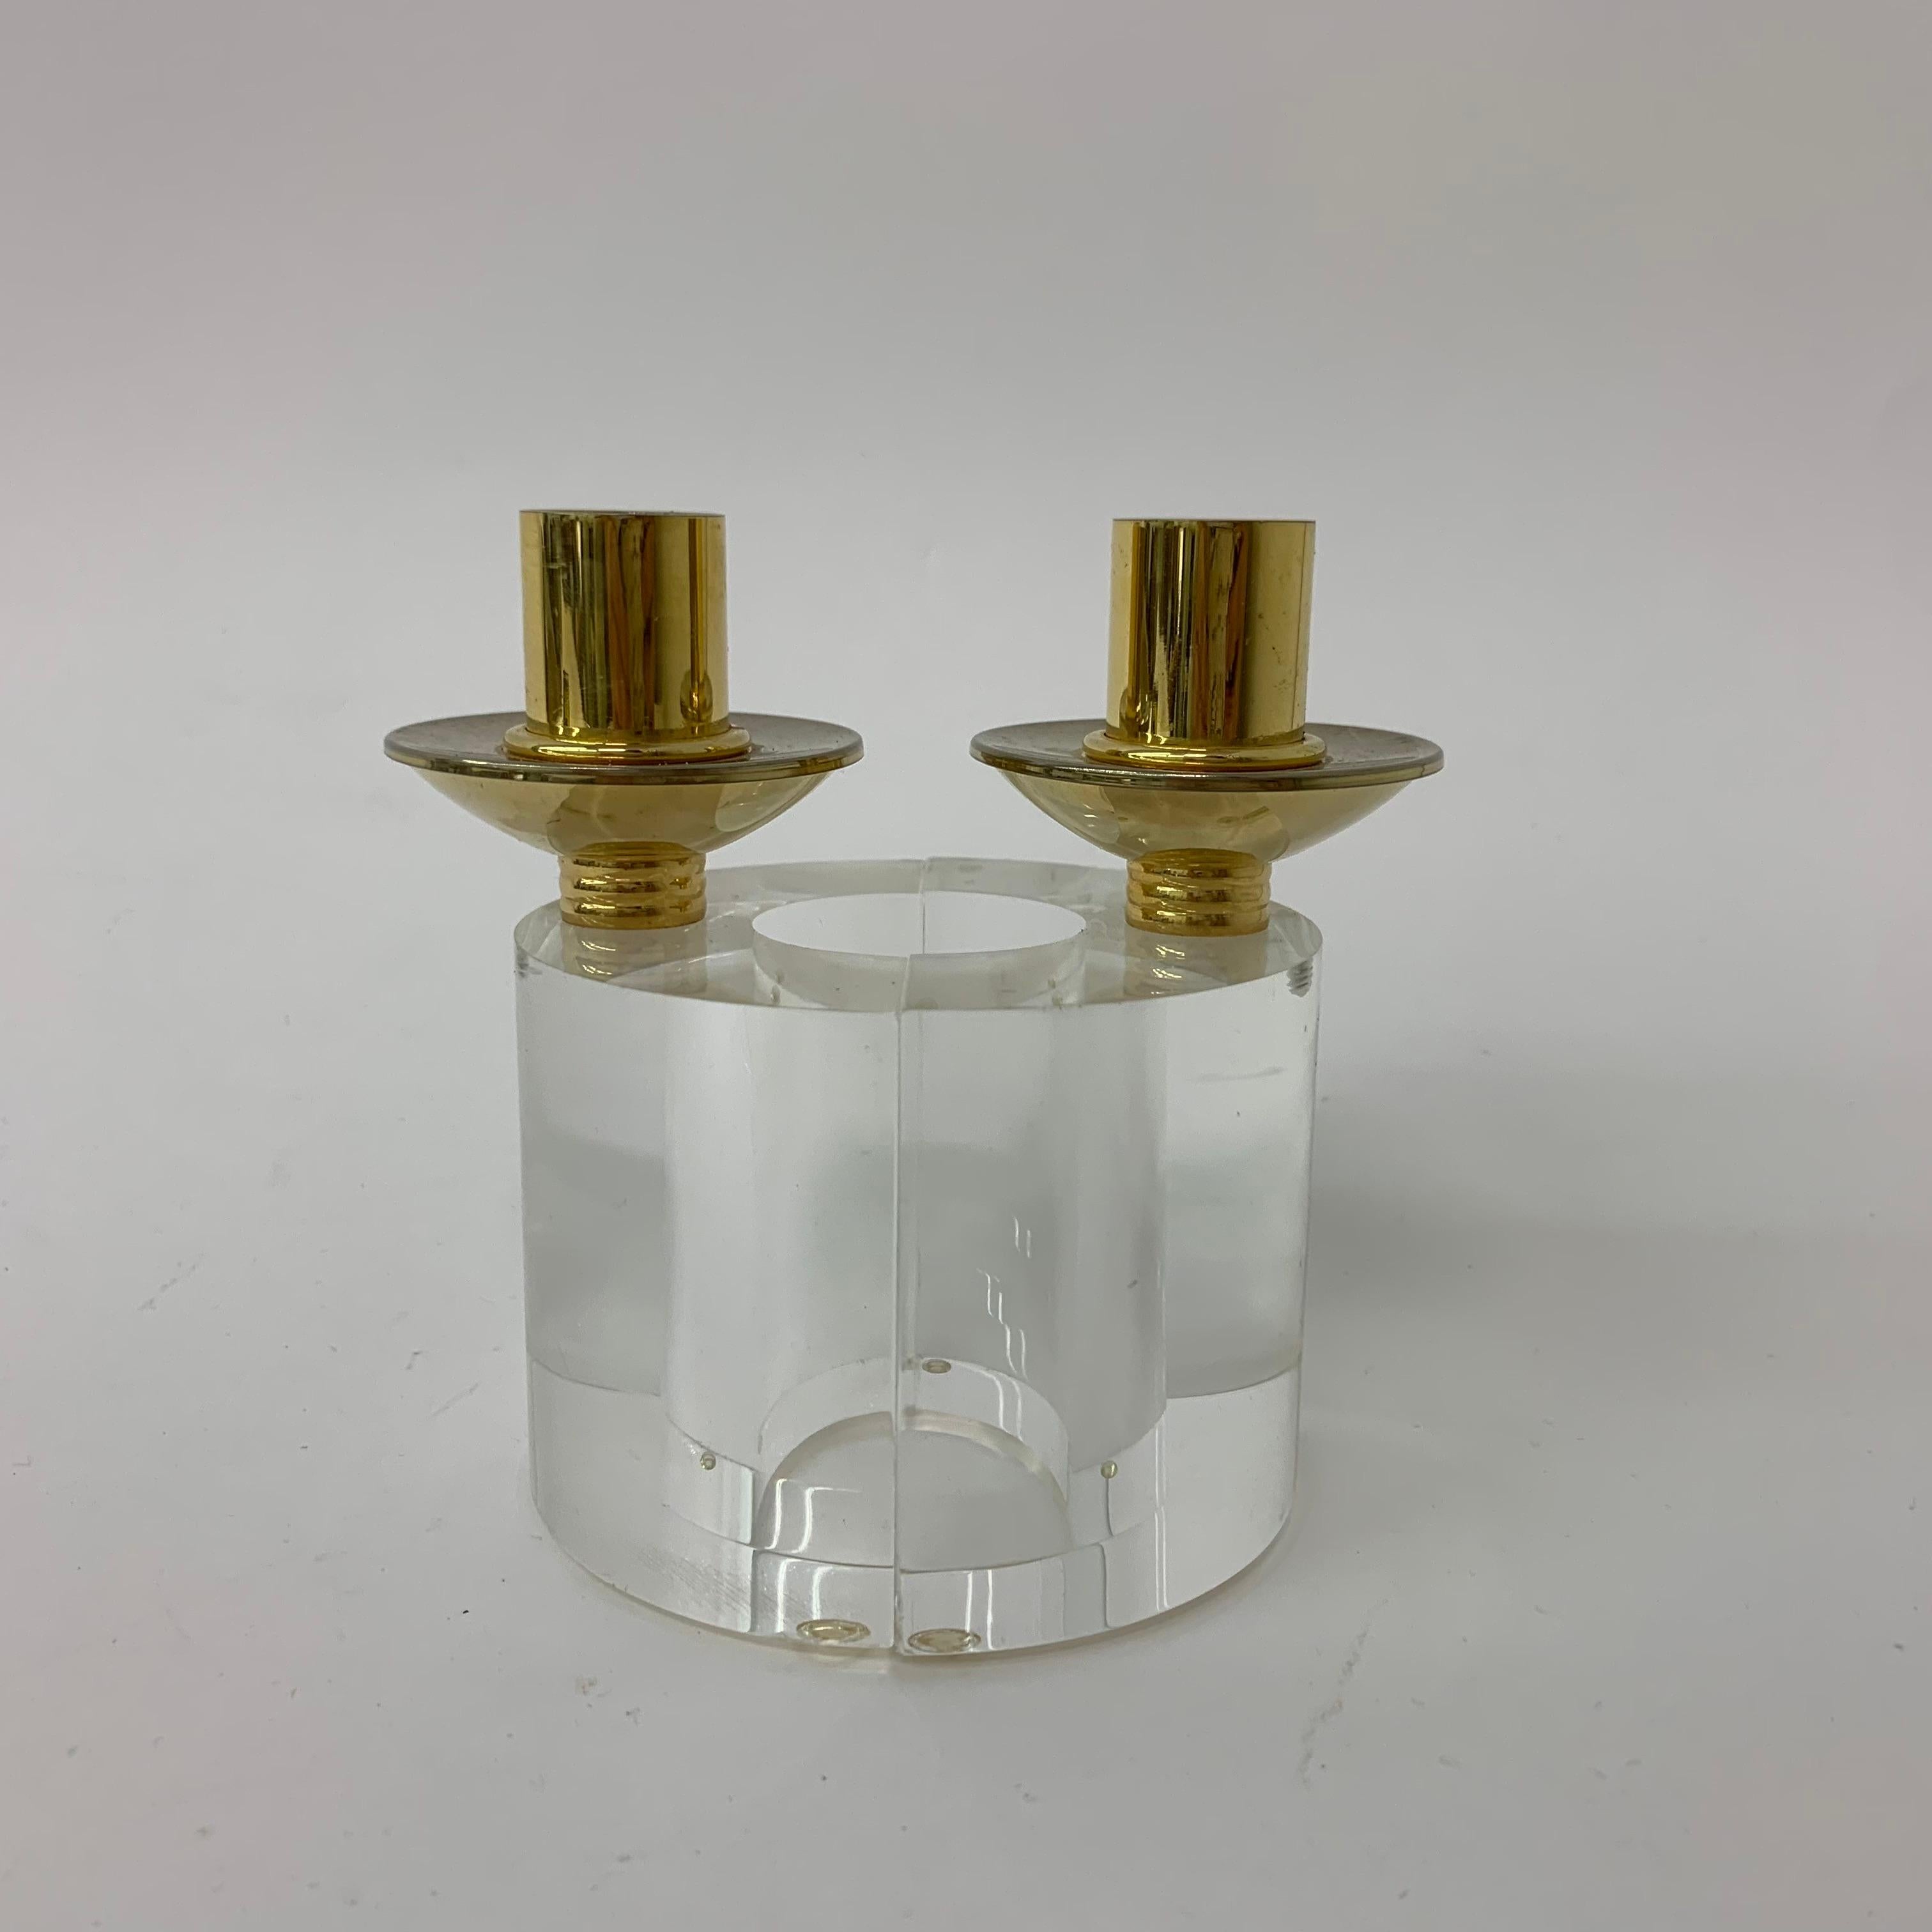 Set of 2 lucite candle sticks, 1970s.